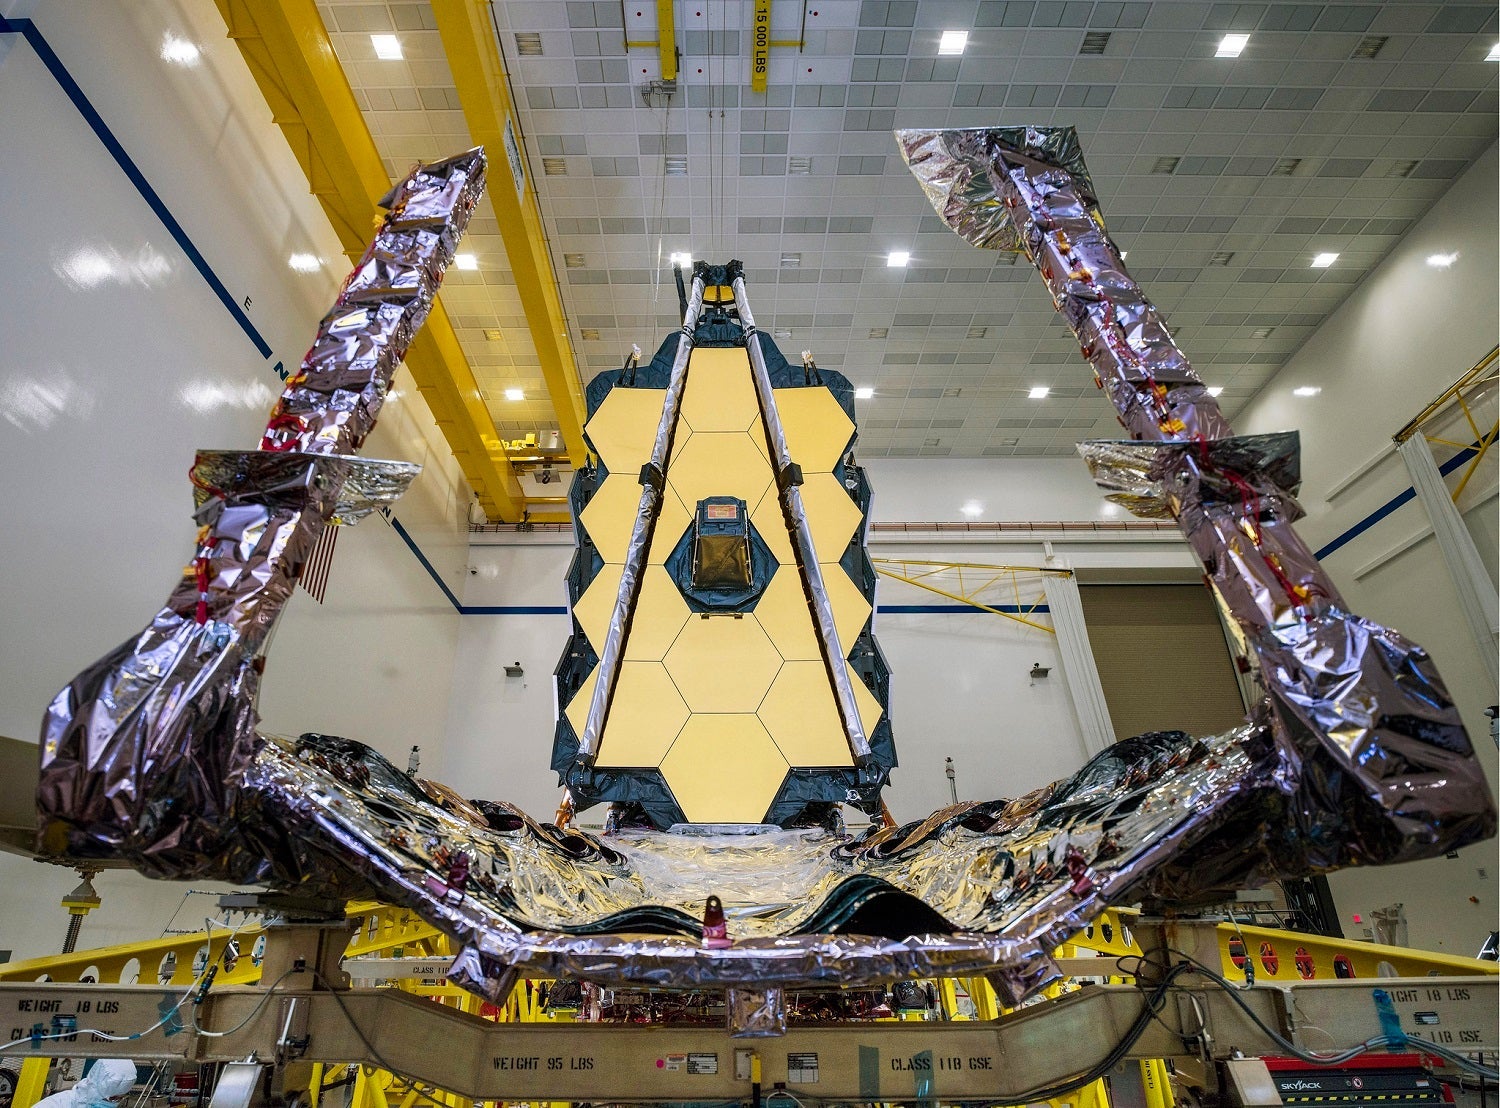 Reaching a major milestone, technicians and engineers successfully connected the two halves of the James Webb Space Telescope.